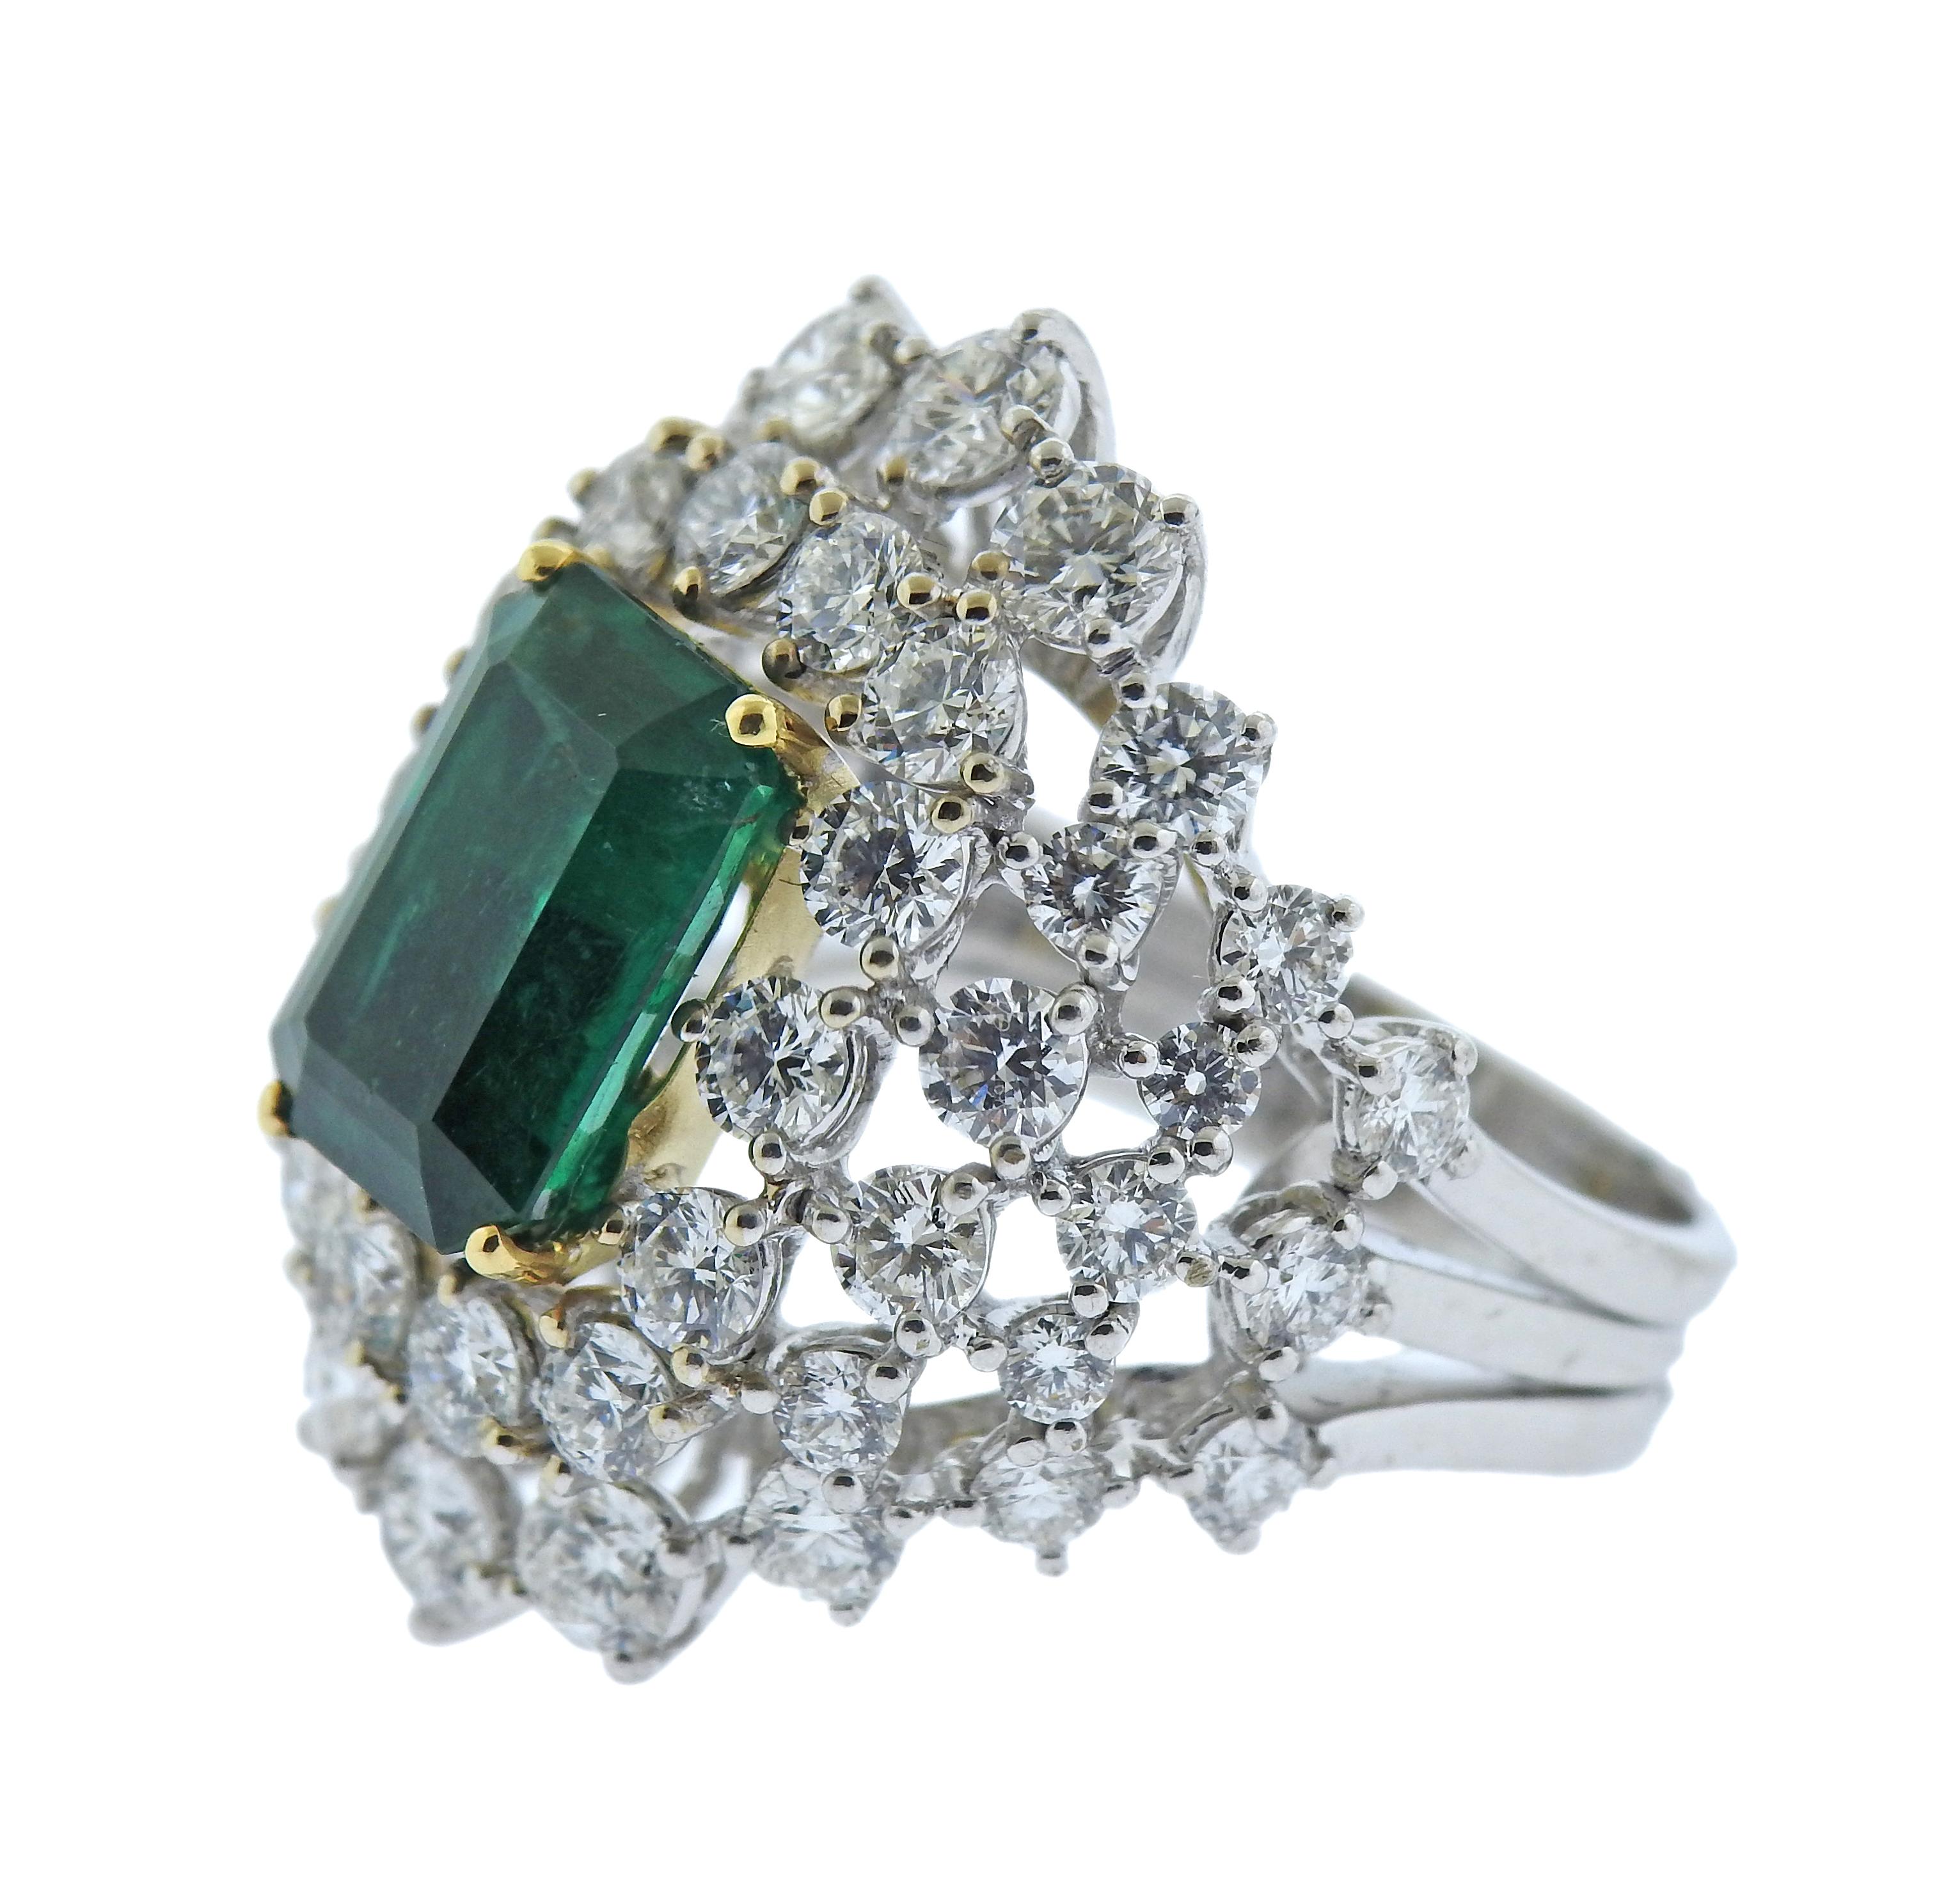 Impressive 18k gold cocktail ring by Leo Pizzo, set with center emerald  cut approx. 3.94ct emerald ( stone measuring 11.8 x 8.4 x 5.4mm with a tiny chip on the girdle). surrounded with approx. 3.72ctw in diamonds. Ring size - 7.25, ring top - 26mm